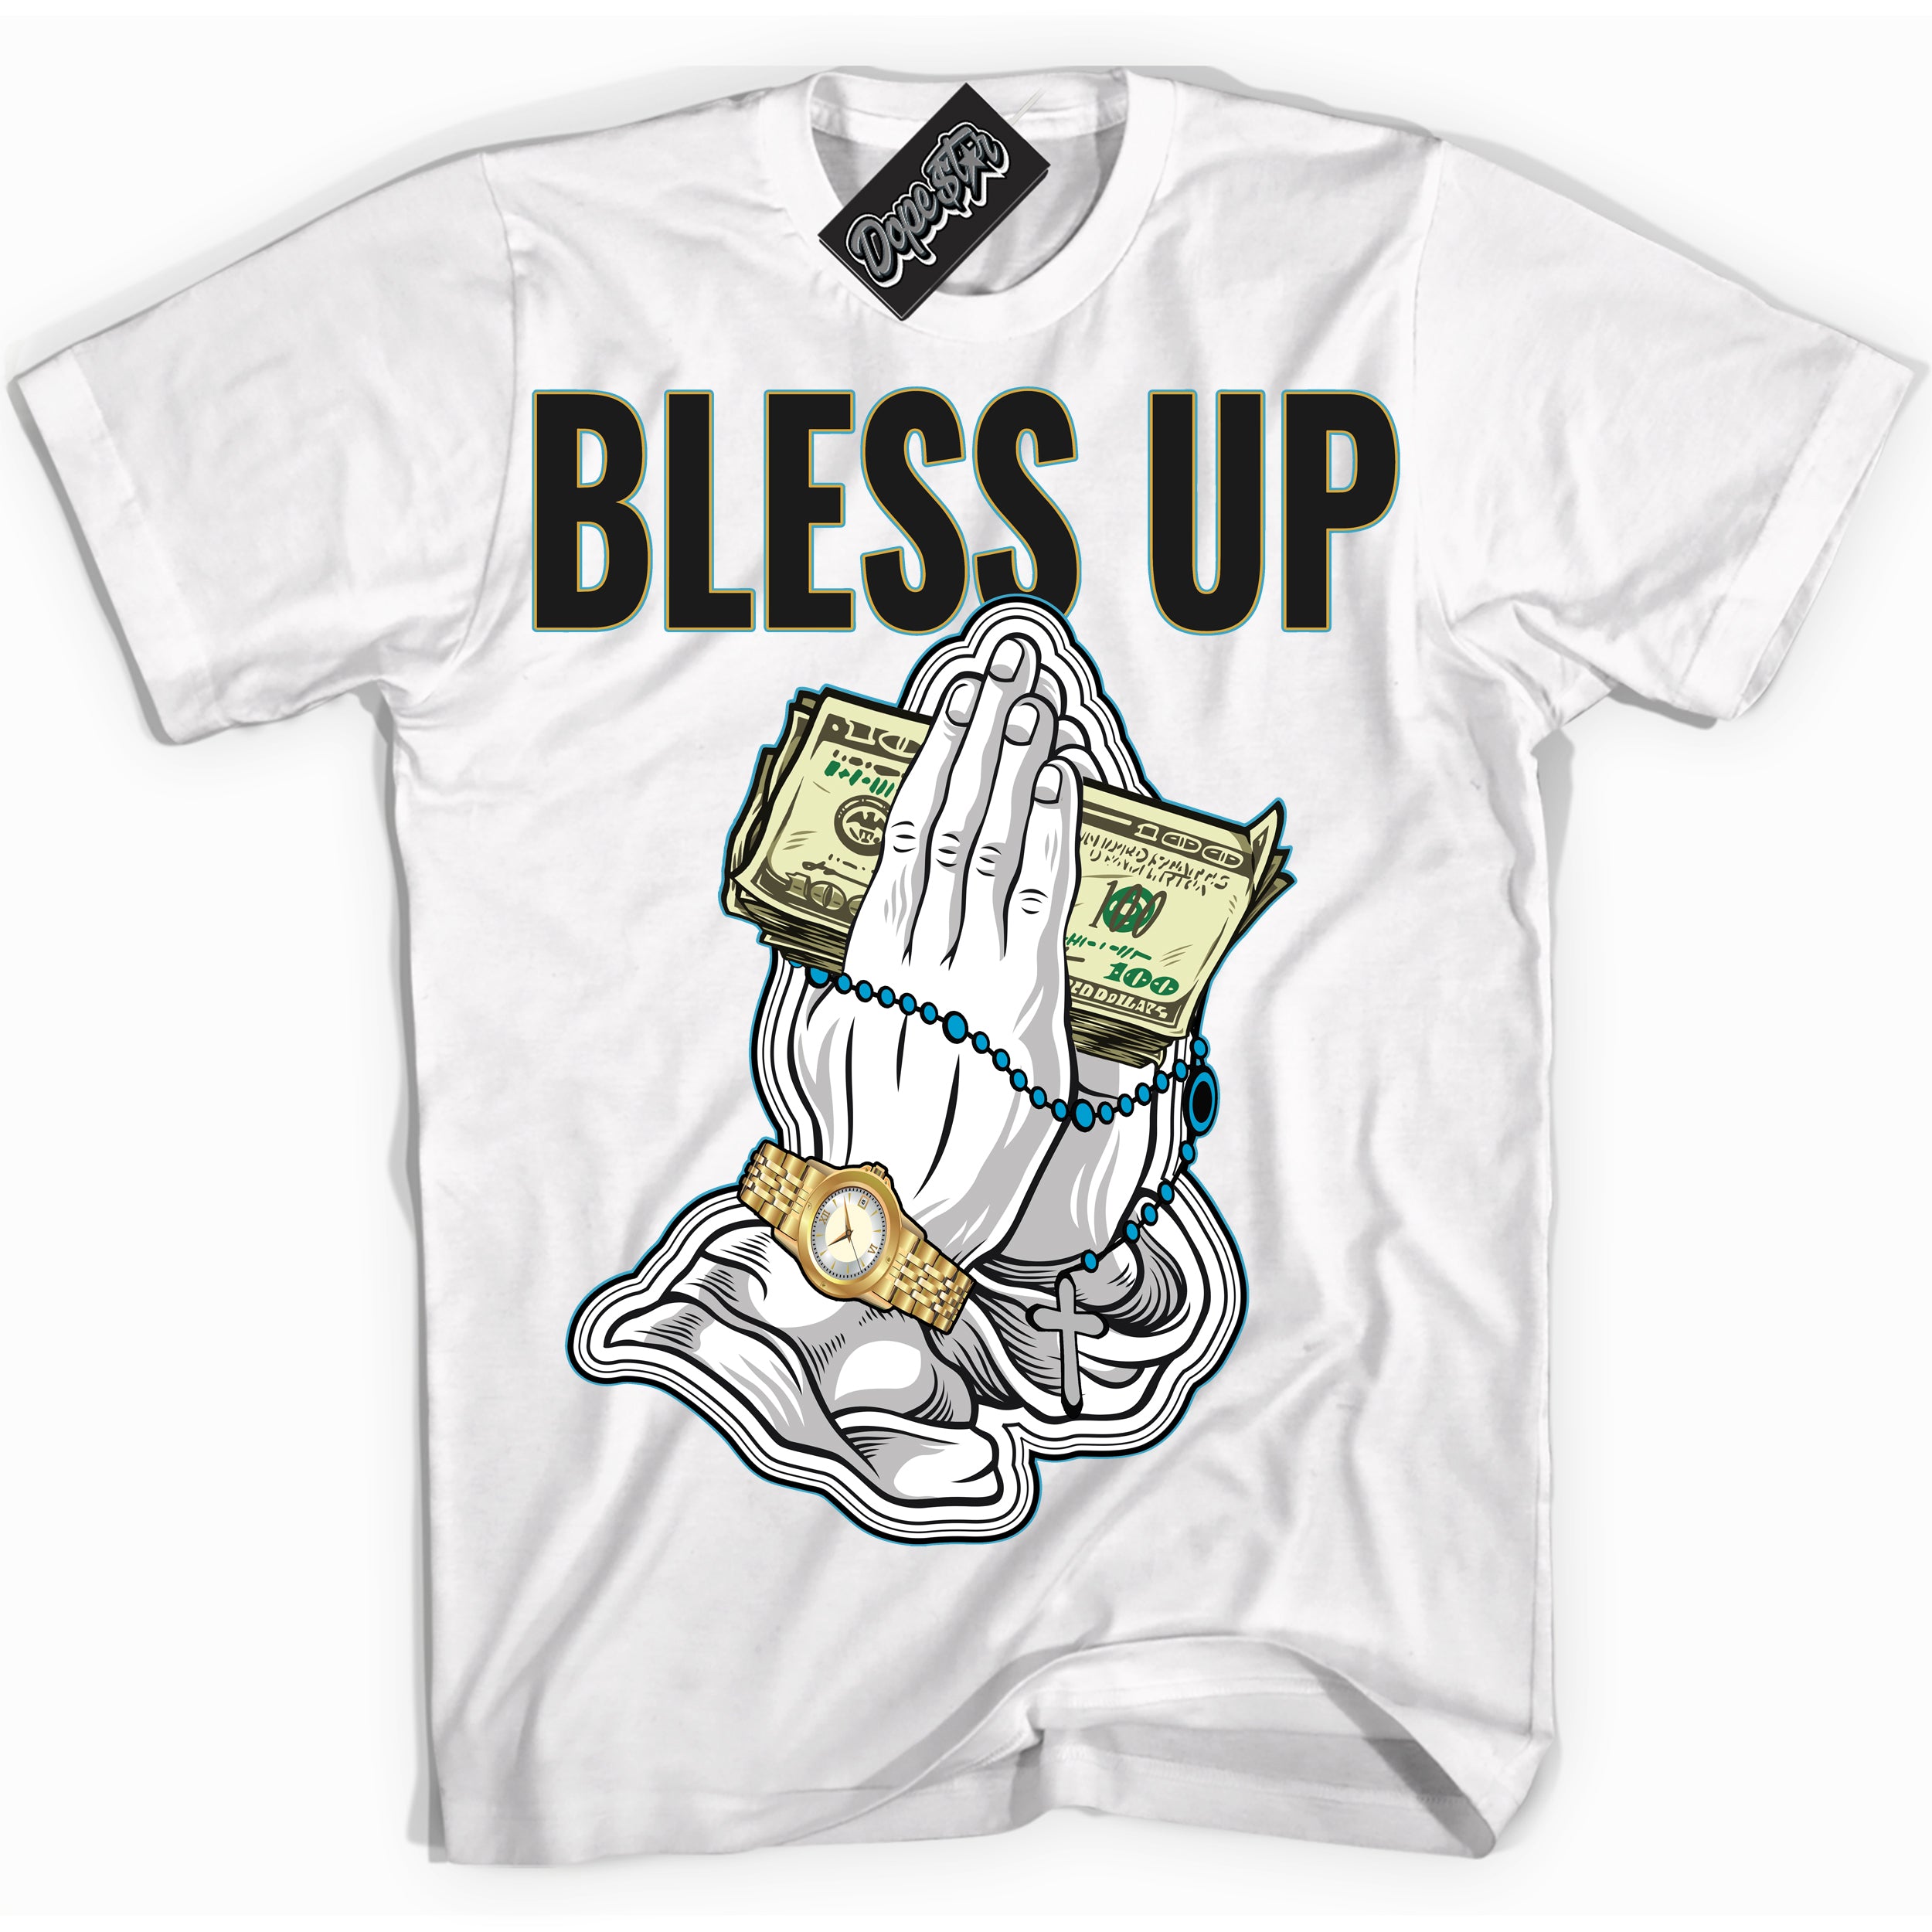 Cool White Shirt with “ Bless Up” design that perfectly matches Aqua 5s Sneakers.